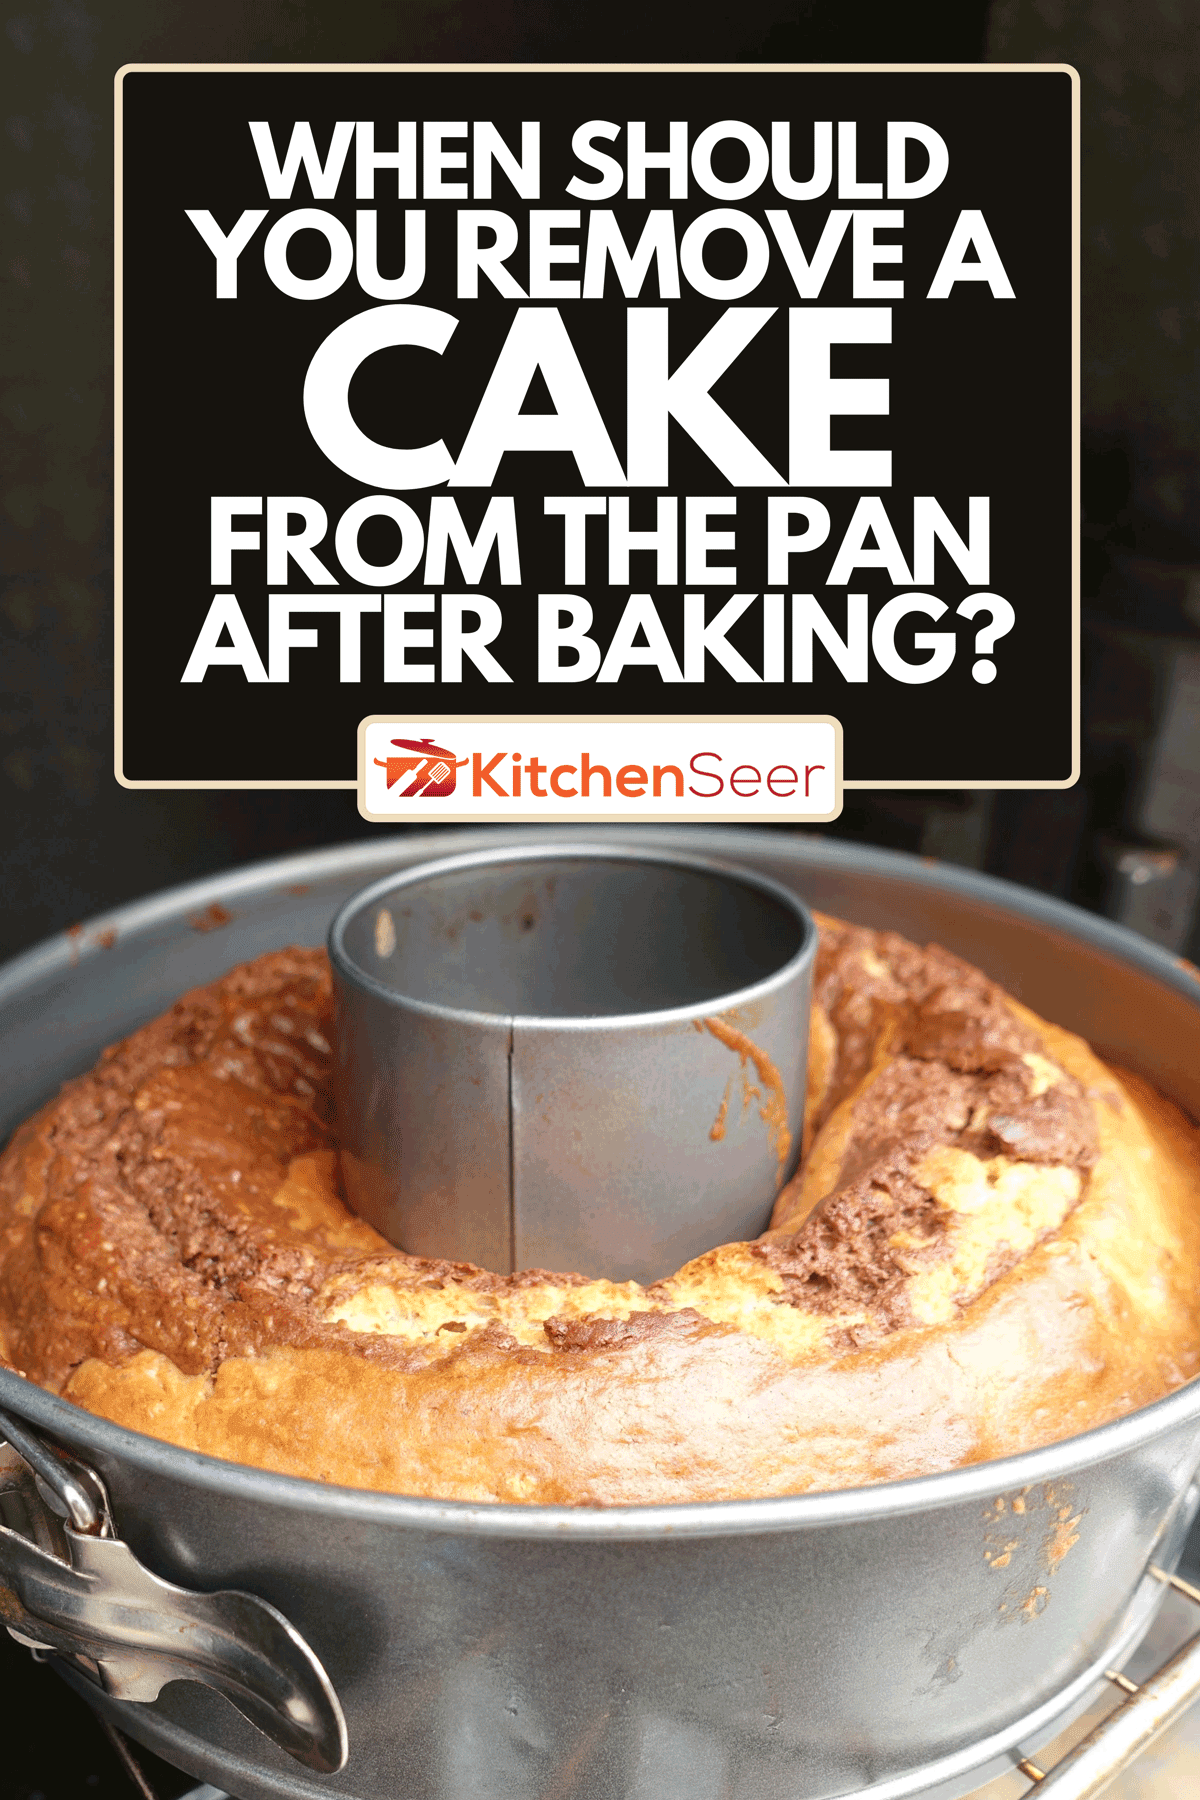 Baking a chocolate cake made in a cake pan, When Should You Remove A Cake From The Pan After Baking?